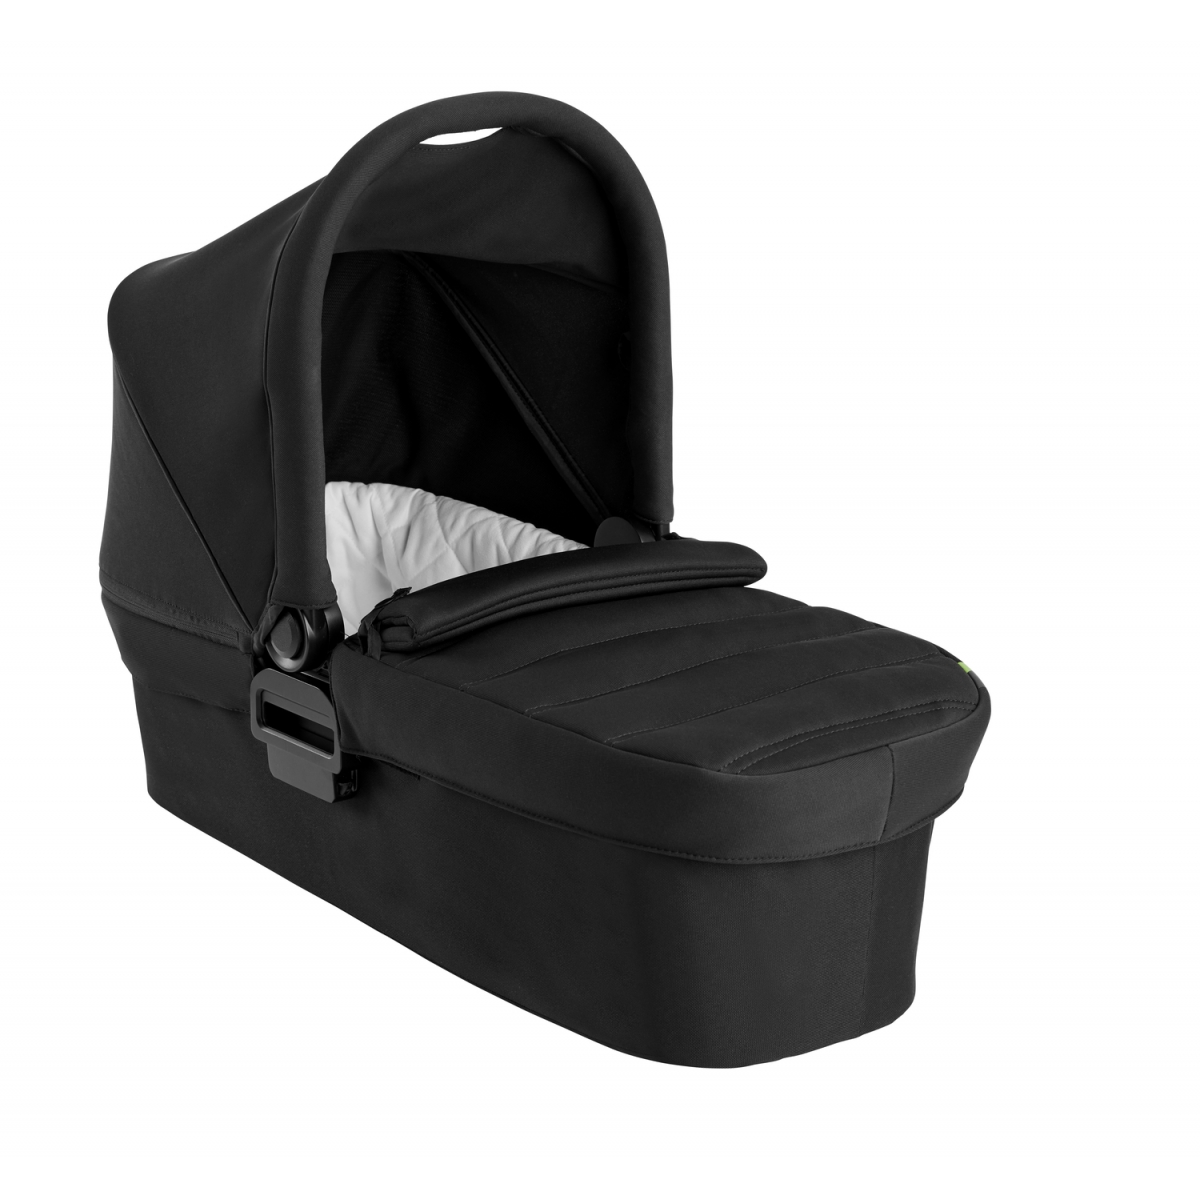 Baby Jogger City Tour 2 Double Carrycot